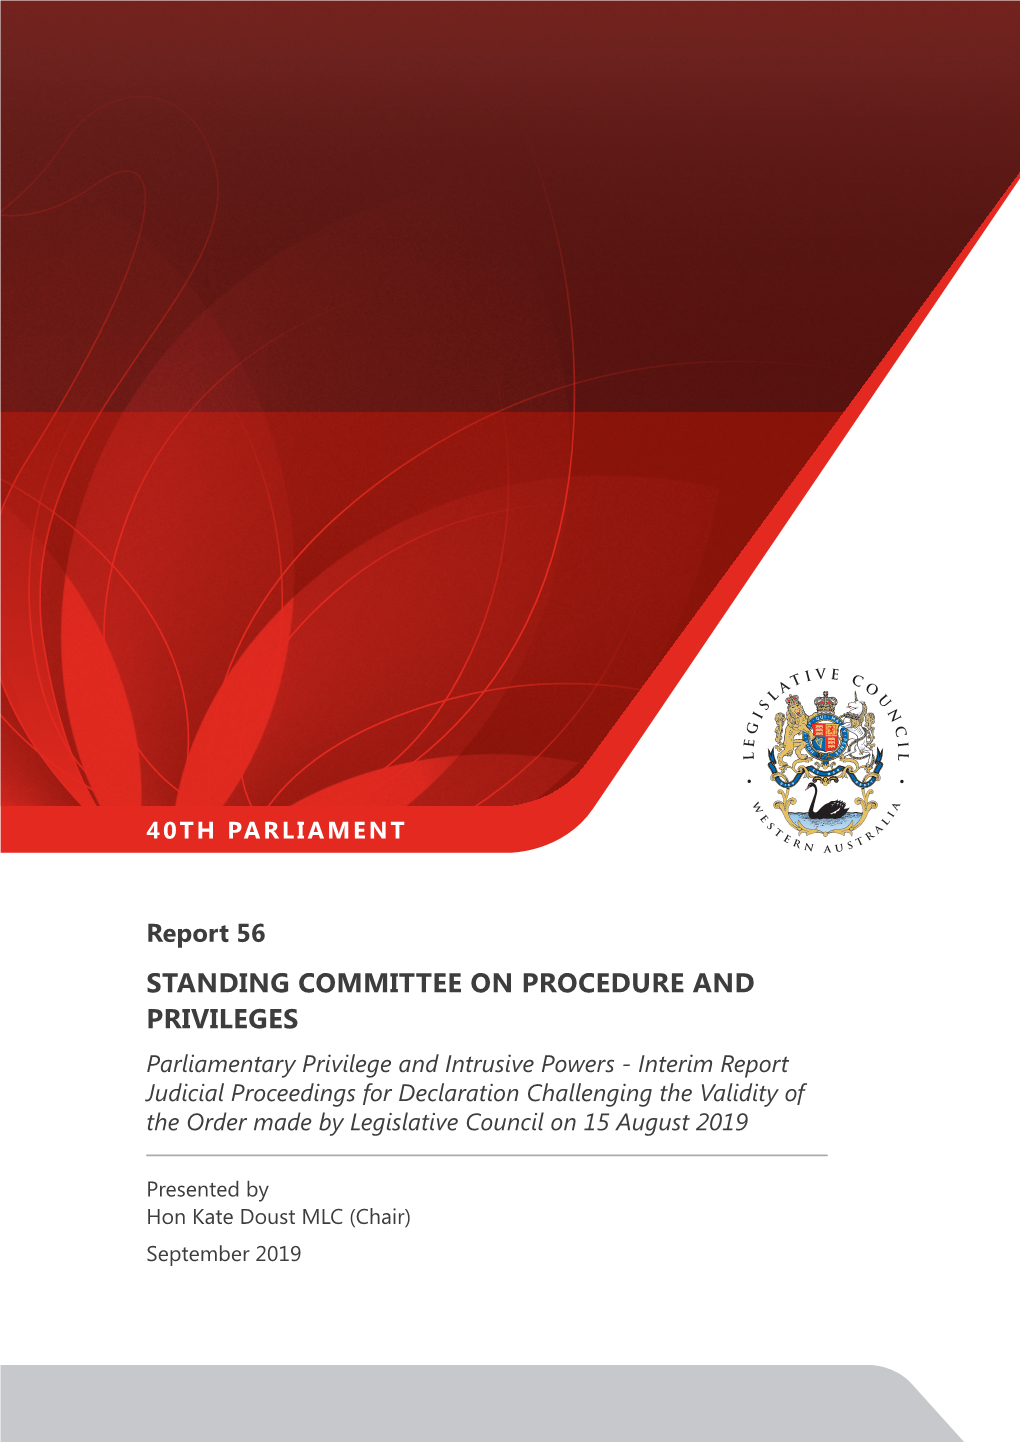 Standing Committee on Procedure and Privileges